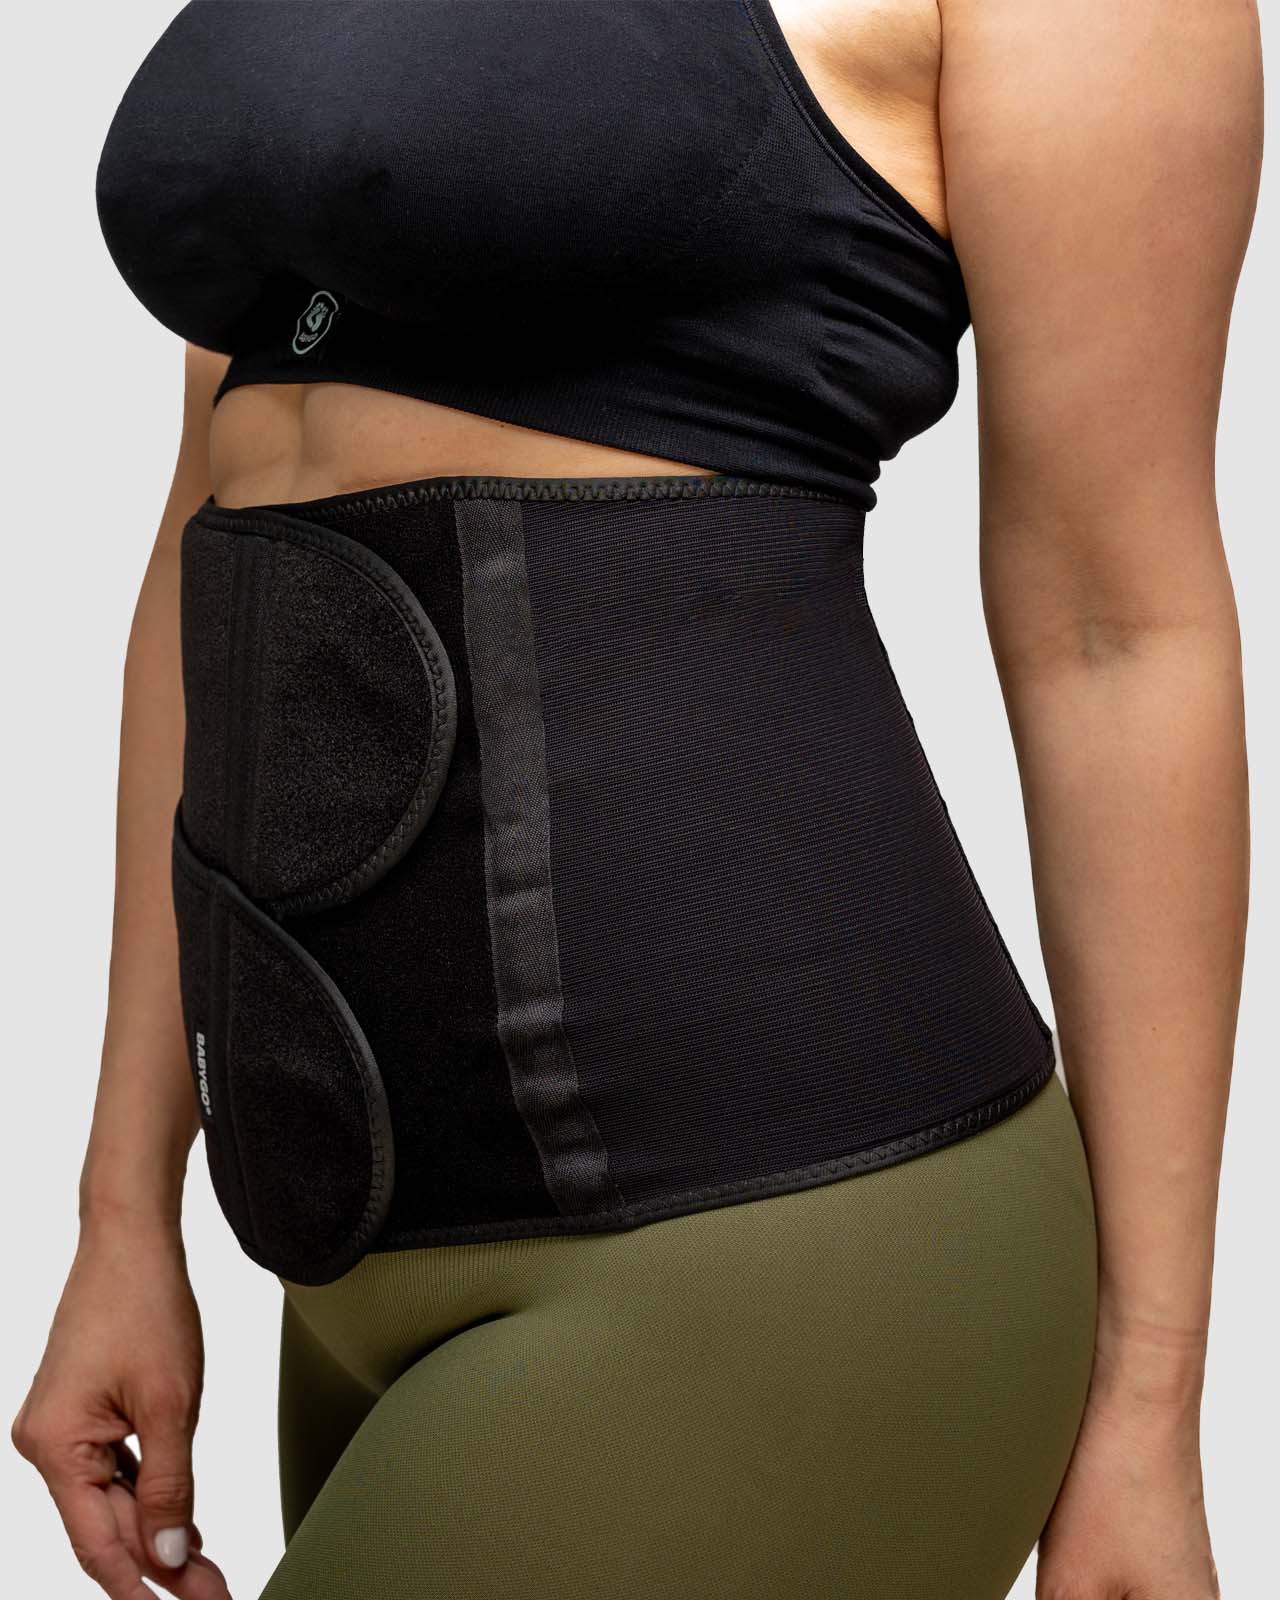 Stretchy Body Shaper Postnatal Shapewear for Postpartum Recovery - China  Postpartum Belt and Belly Belt price